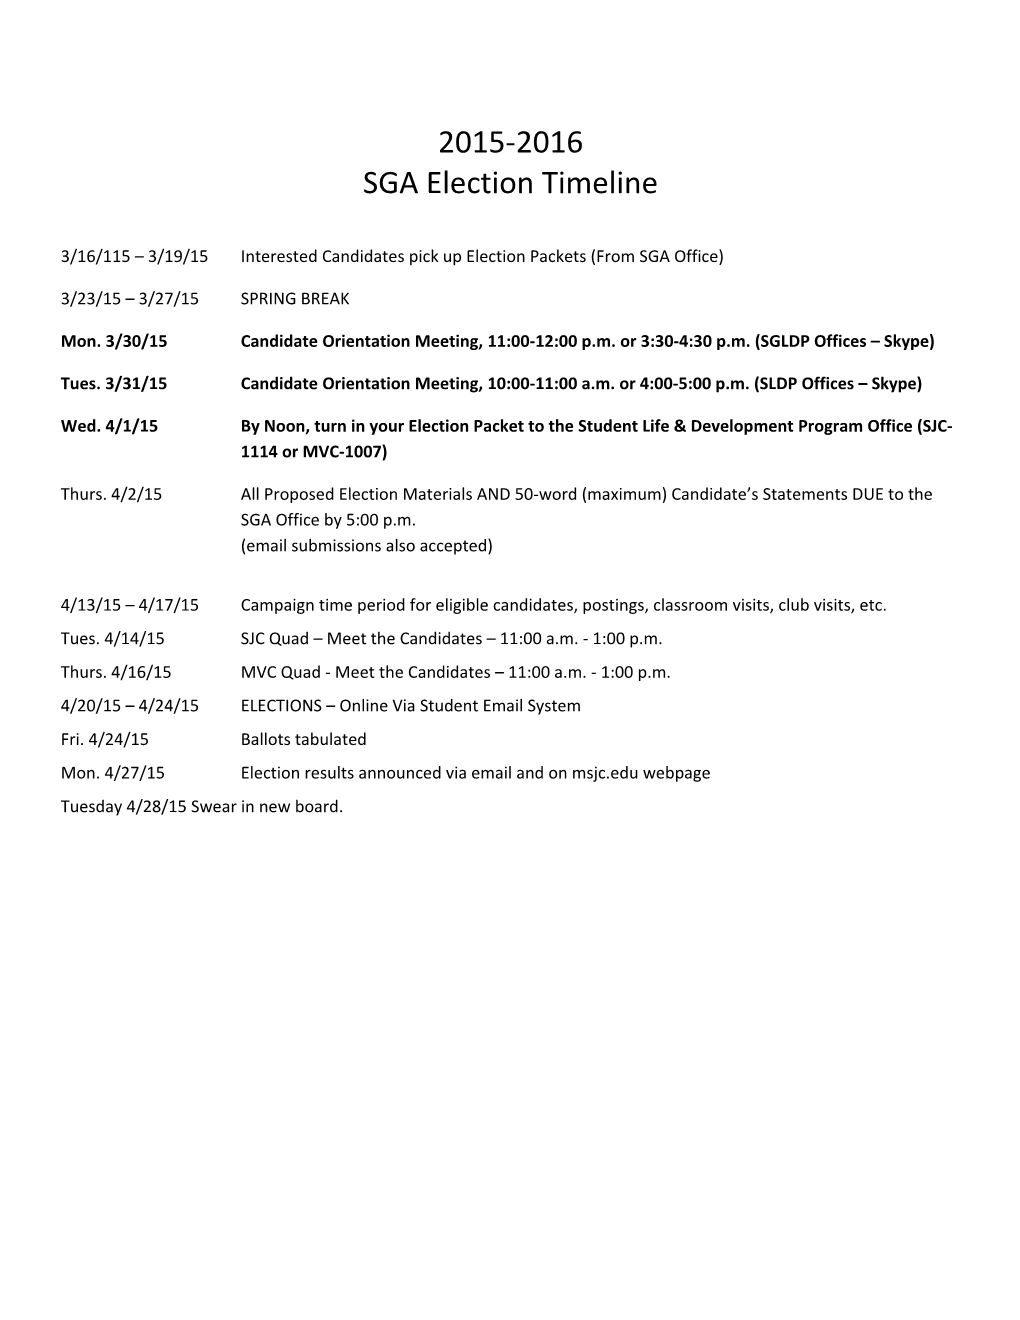 3/16/115 3/19/15Interested Candidates Pick up Election Packets (From SGA Office)